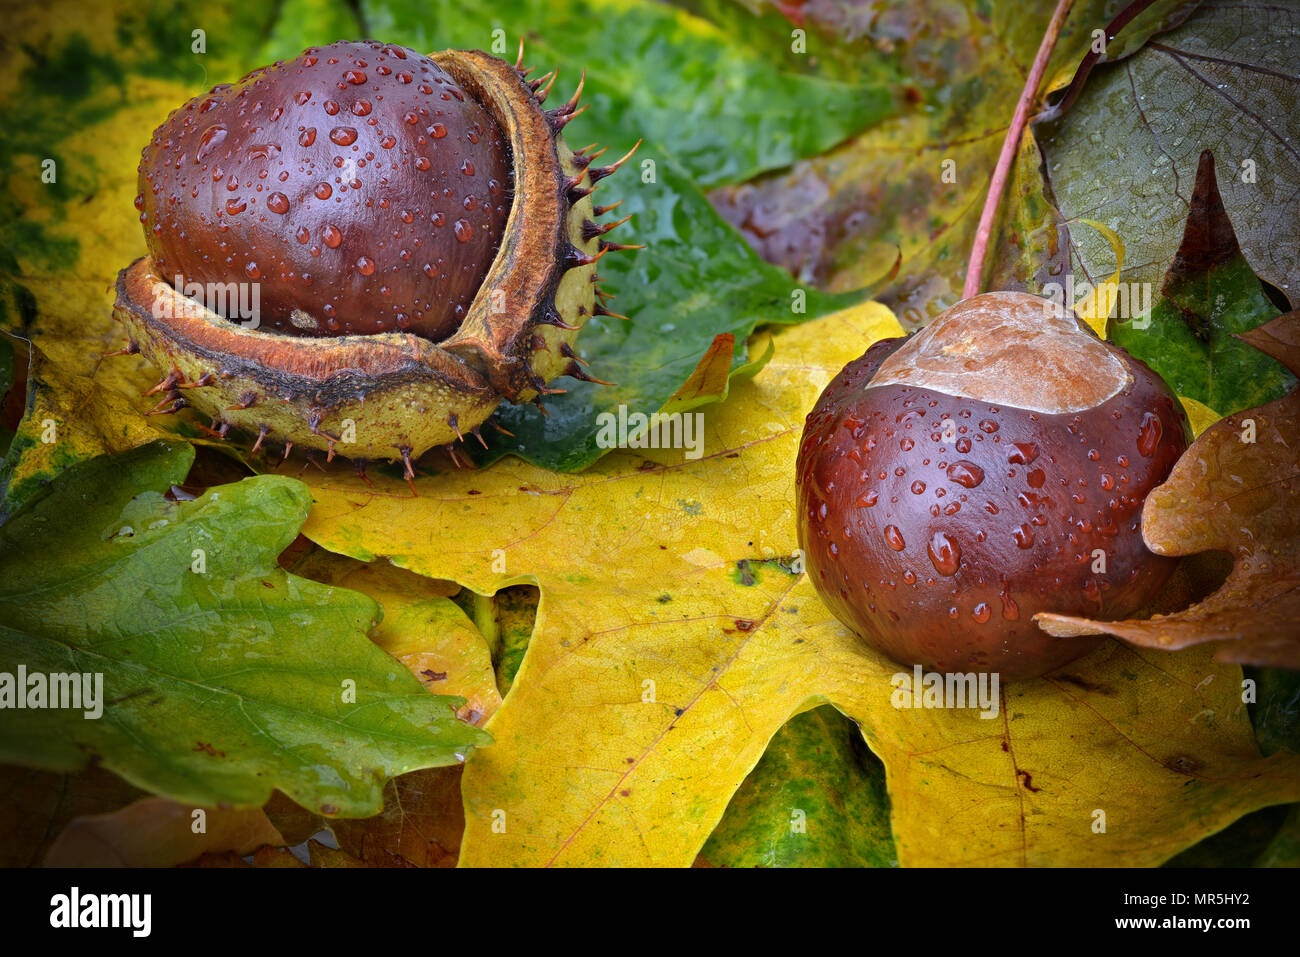 two chestnuts on autumn leaves Stock Photo